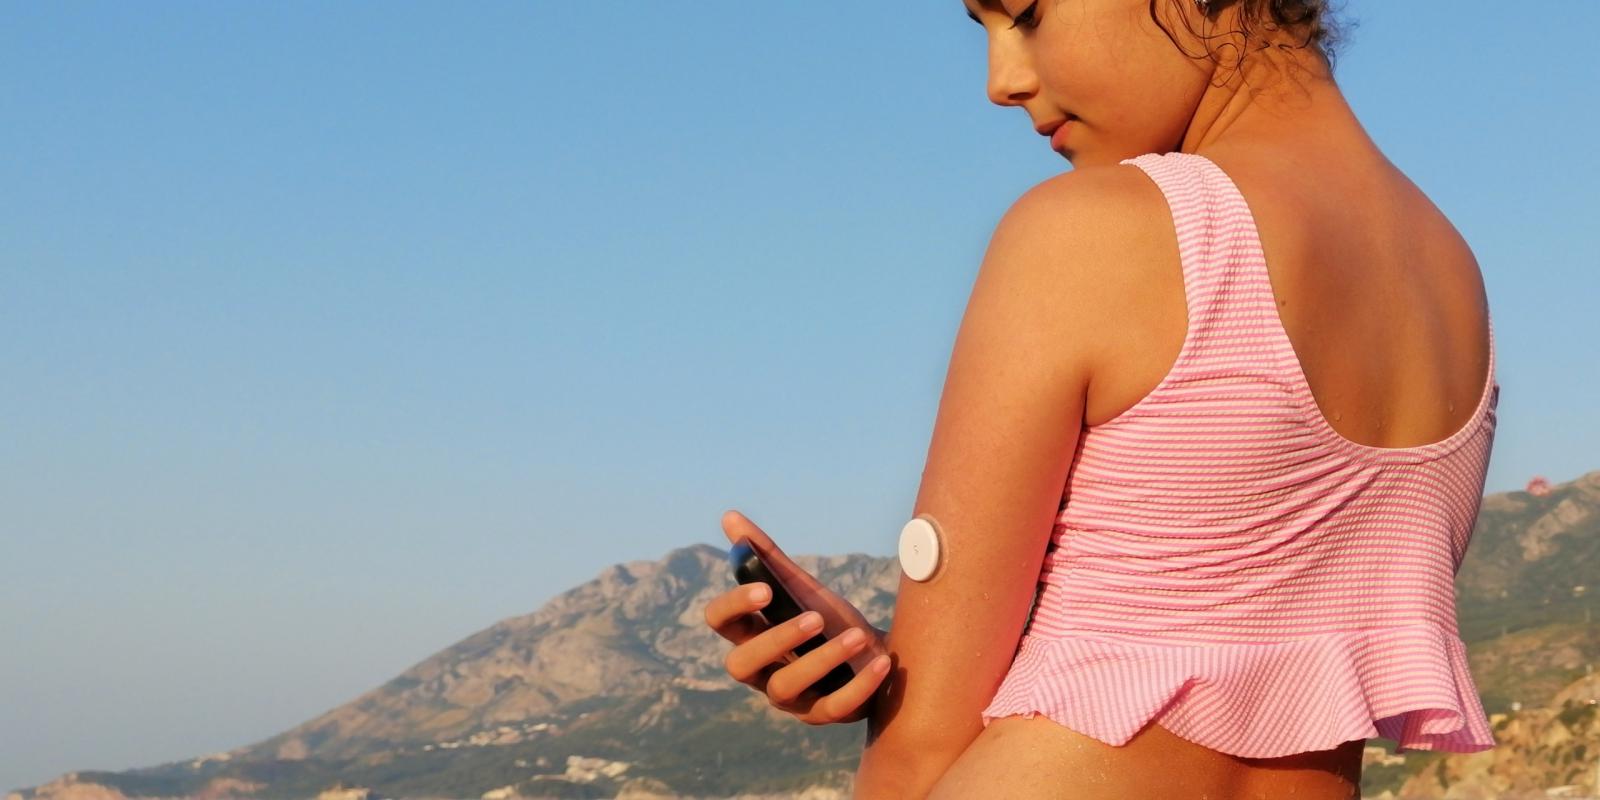 Person at the beach with CGM sensor in their arm